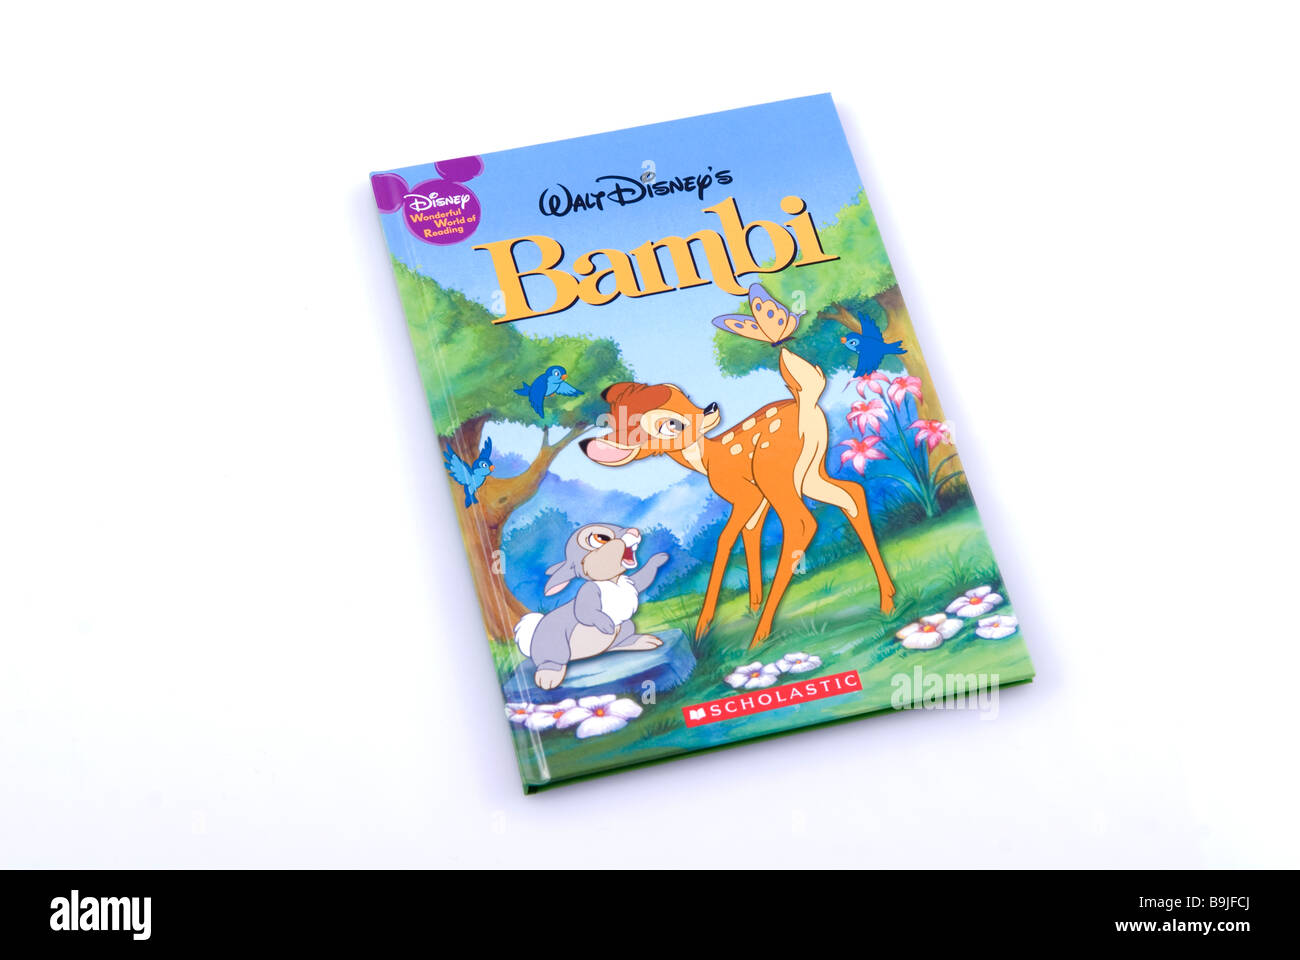 Bambi Story book against a white background Stock Photo